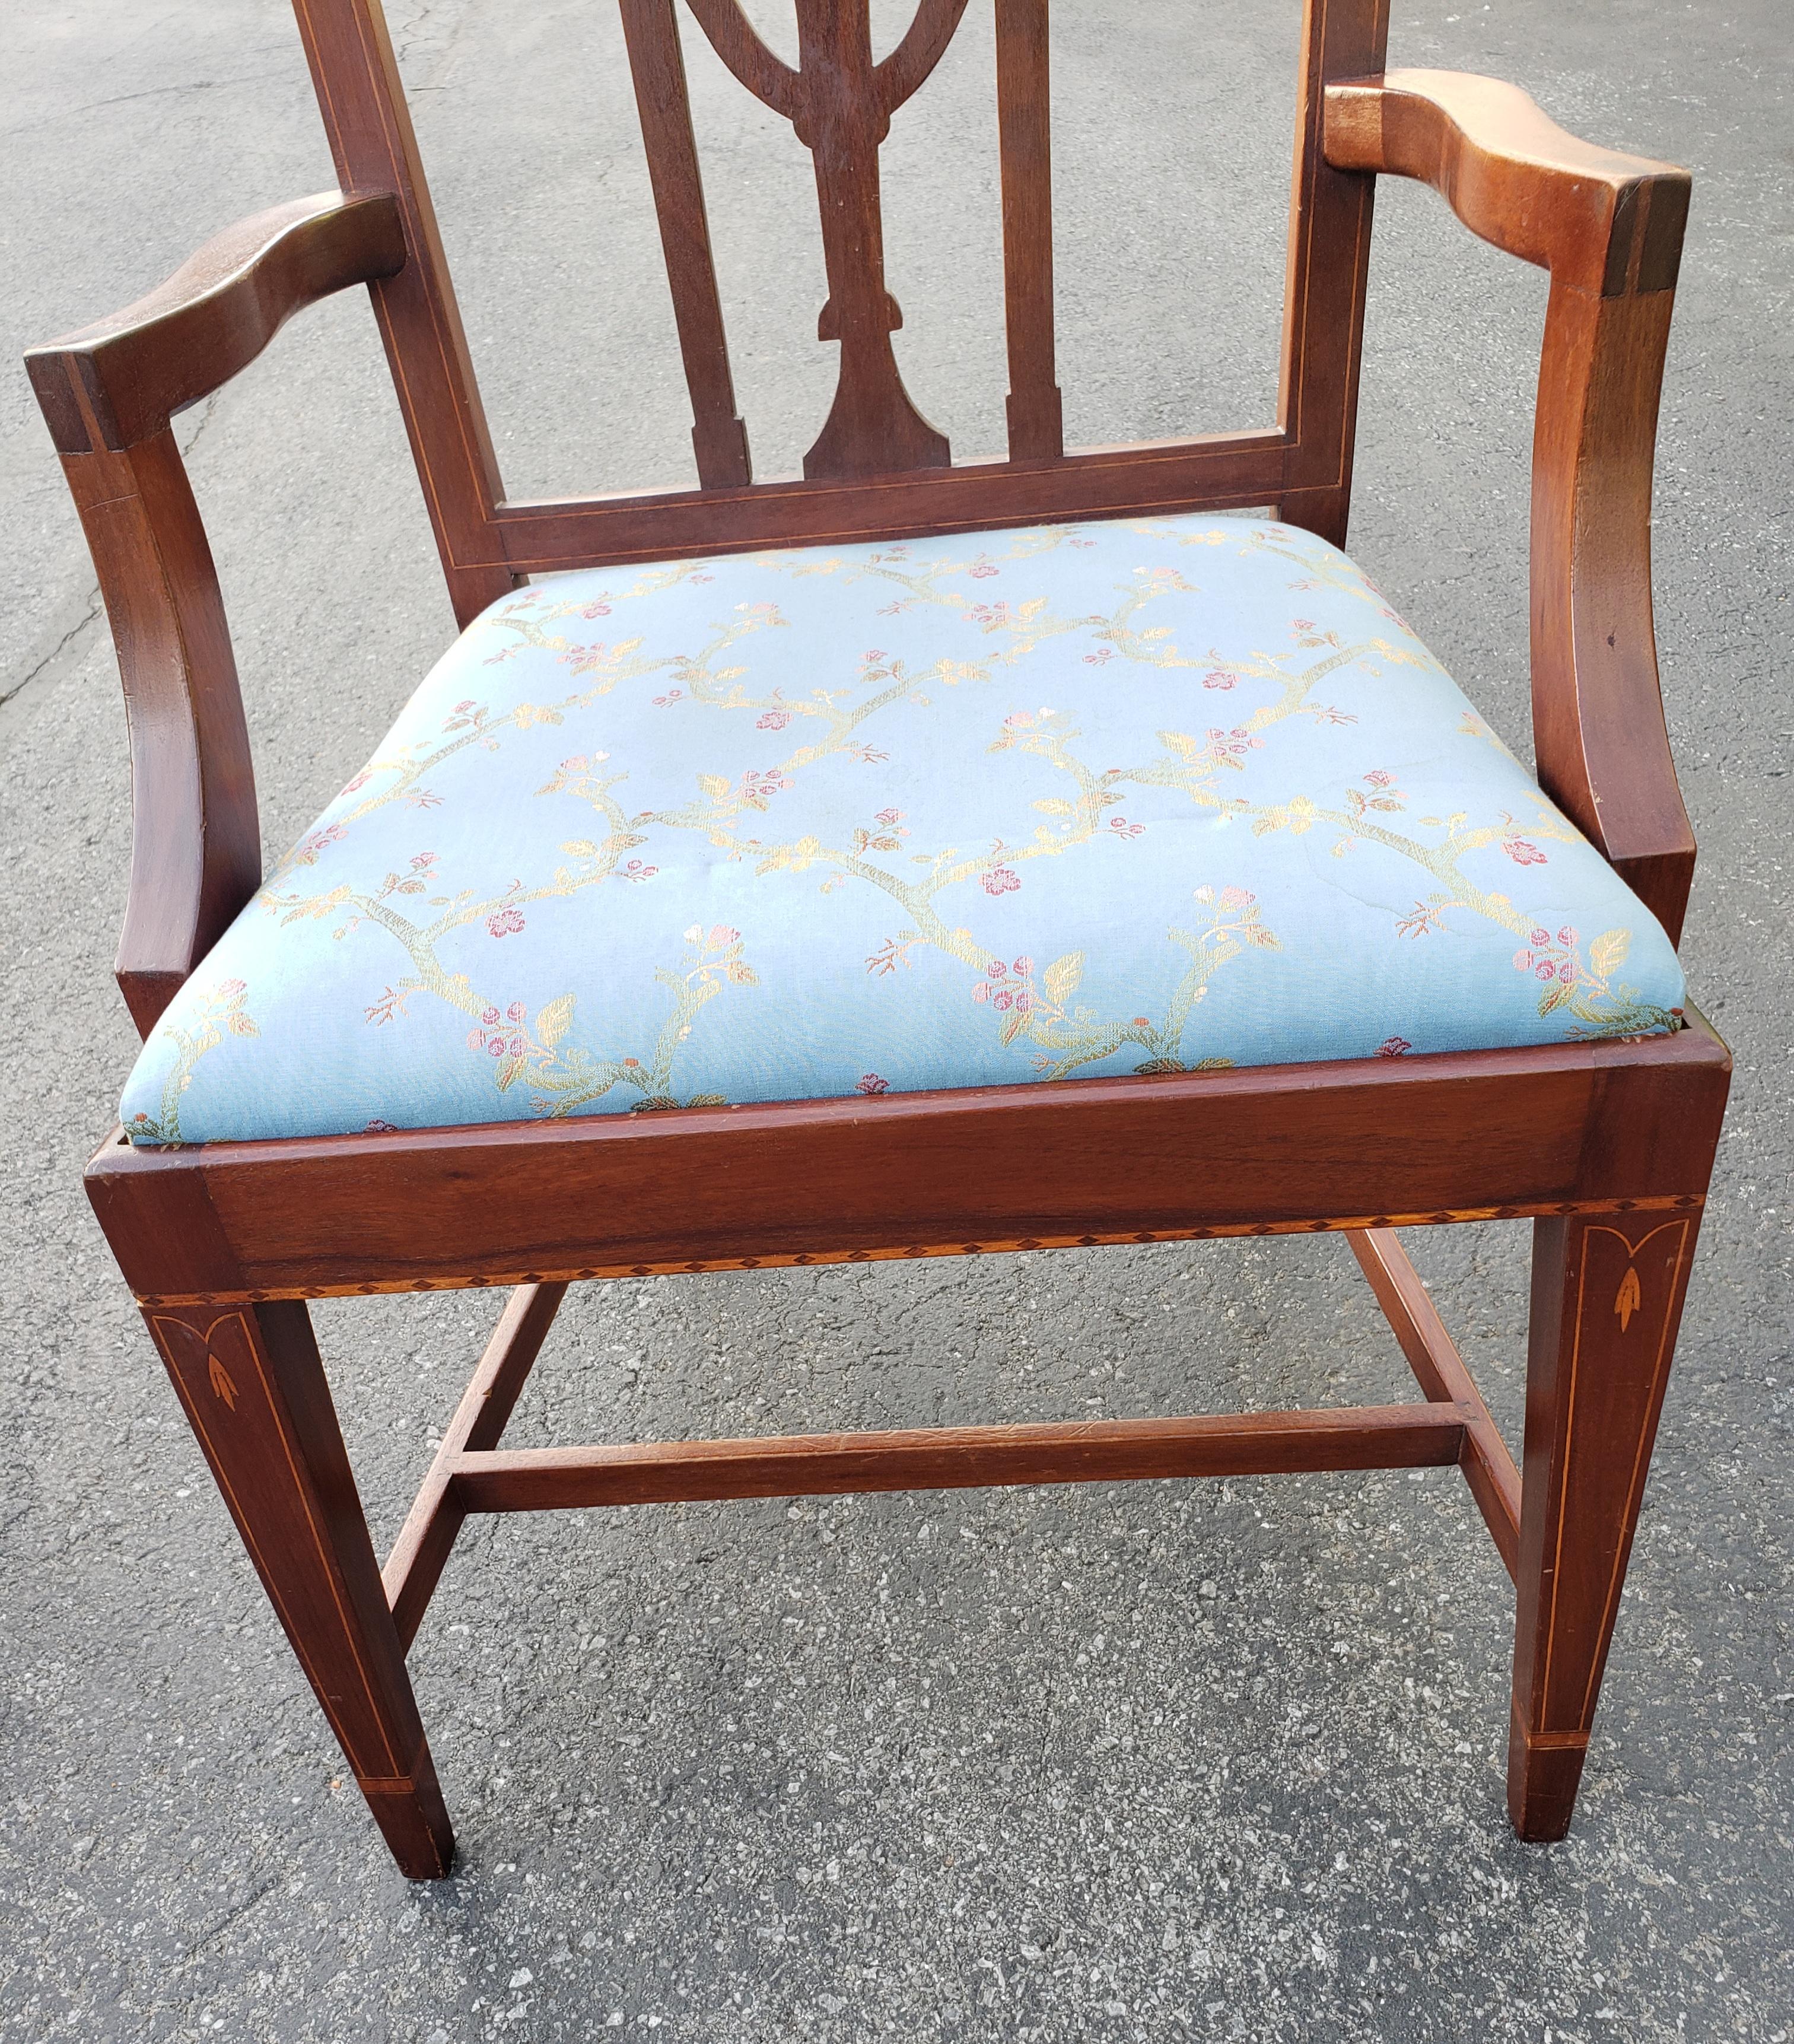 Upholstery Copenhaver's Furniture Chippendale Mahogany Satinwood Inlays Ornate Armchair